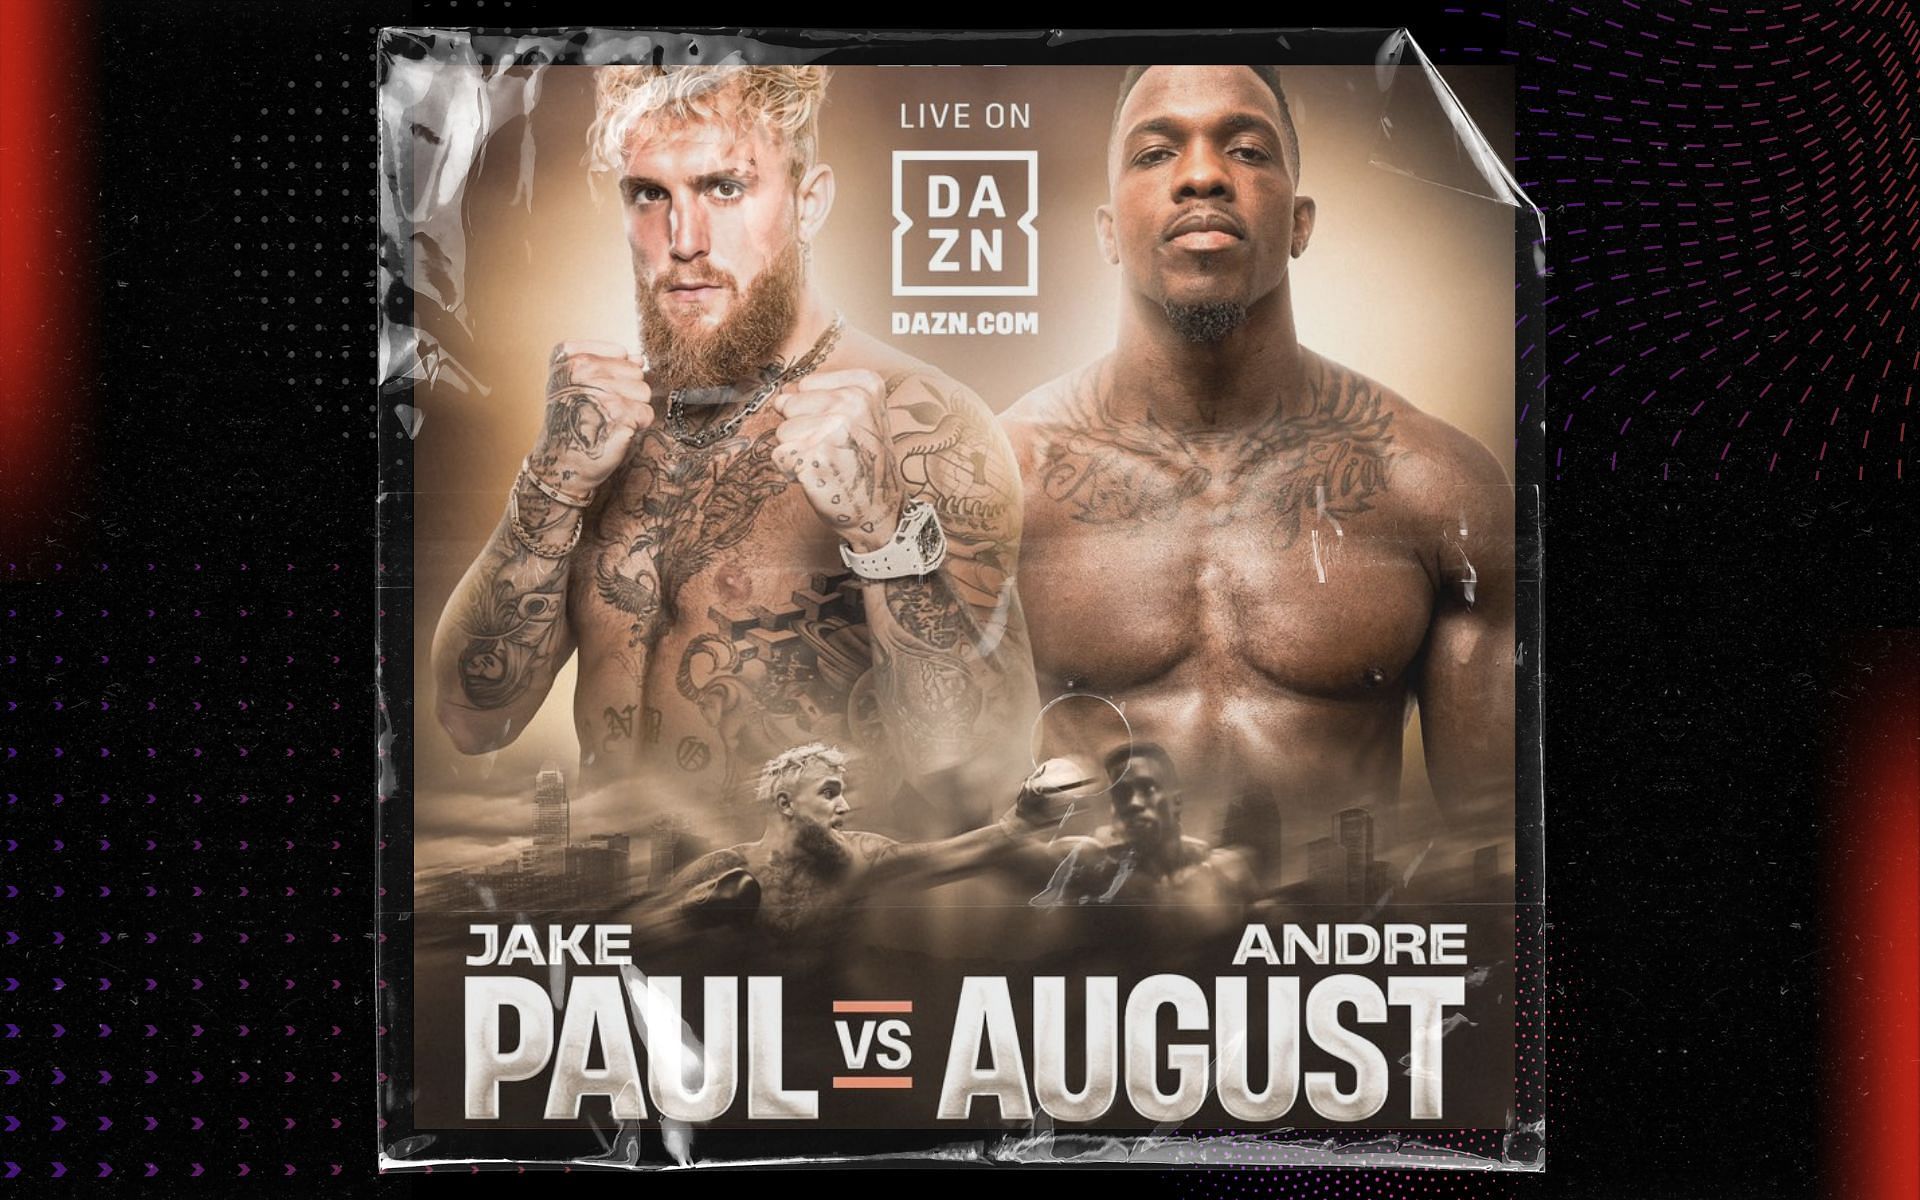 Jake Paul vs Andre August. [Image credits: @daznboxing on Instagram]